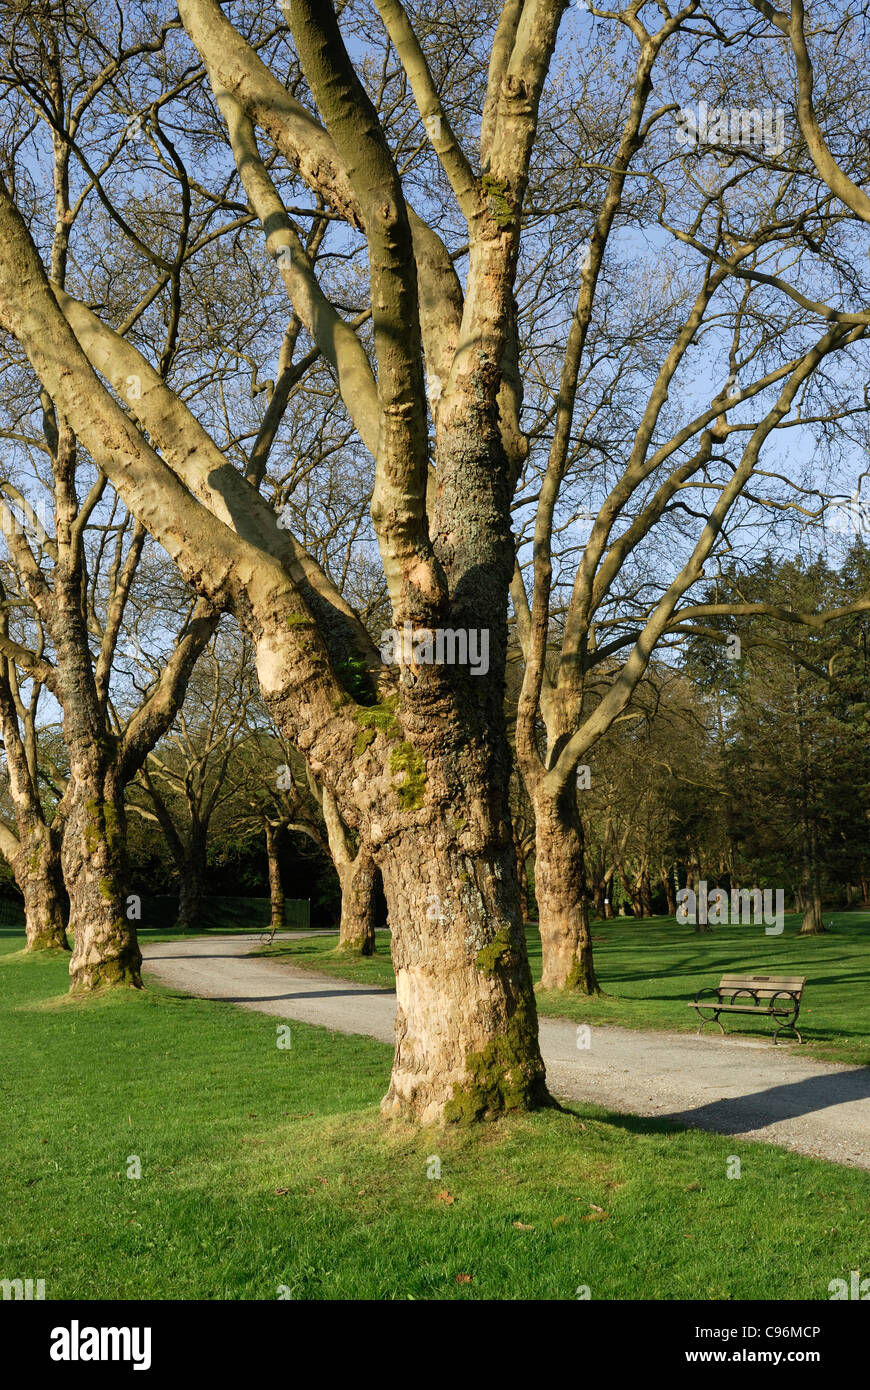 London Plane trees located in Stanley Park, Vancouver. Stock Photo